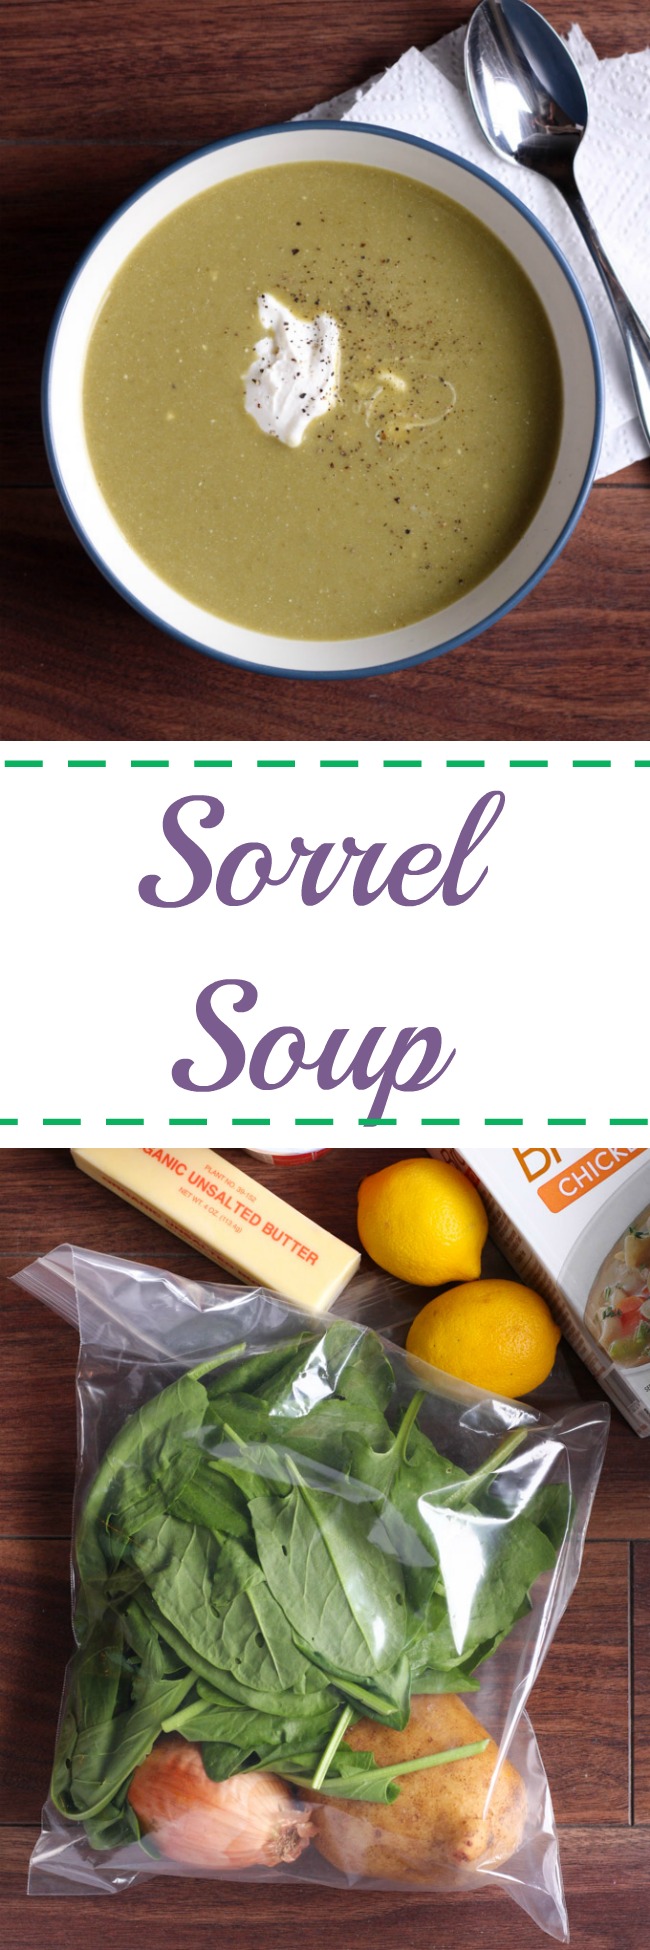 Sorrel soup is tart, lemony, and delicious. This soup is tasty served hot or cold, it's light, and simple to make! www.cookingismessy.com